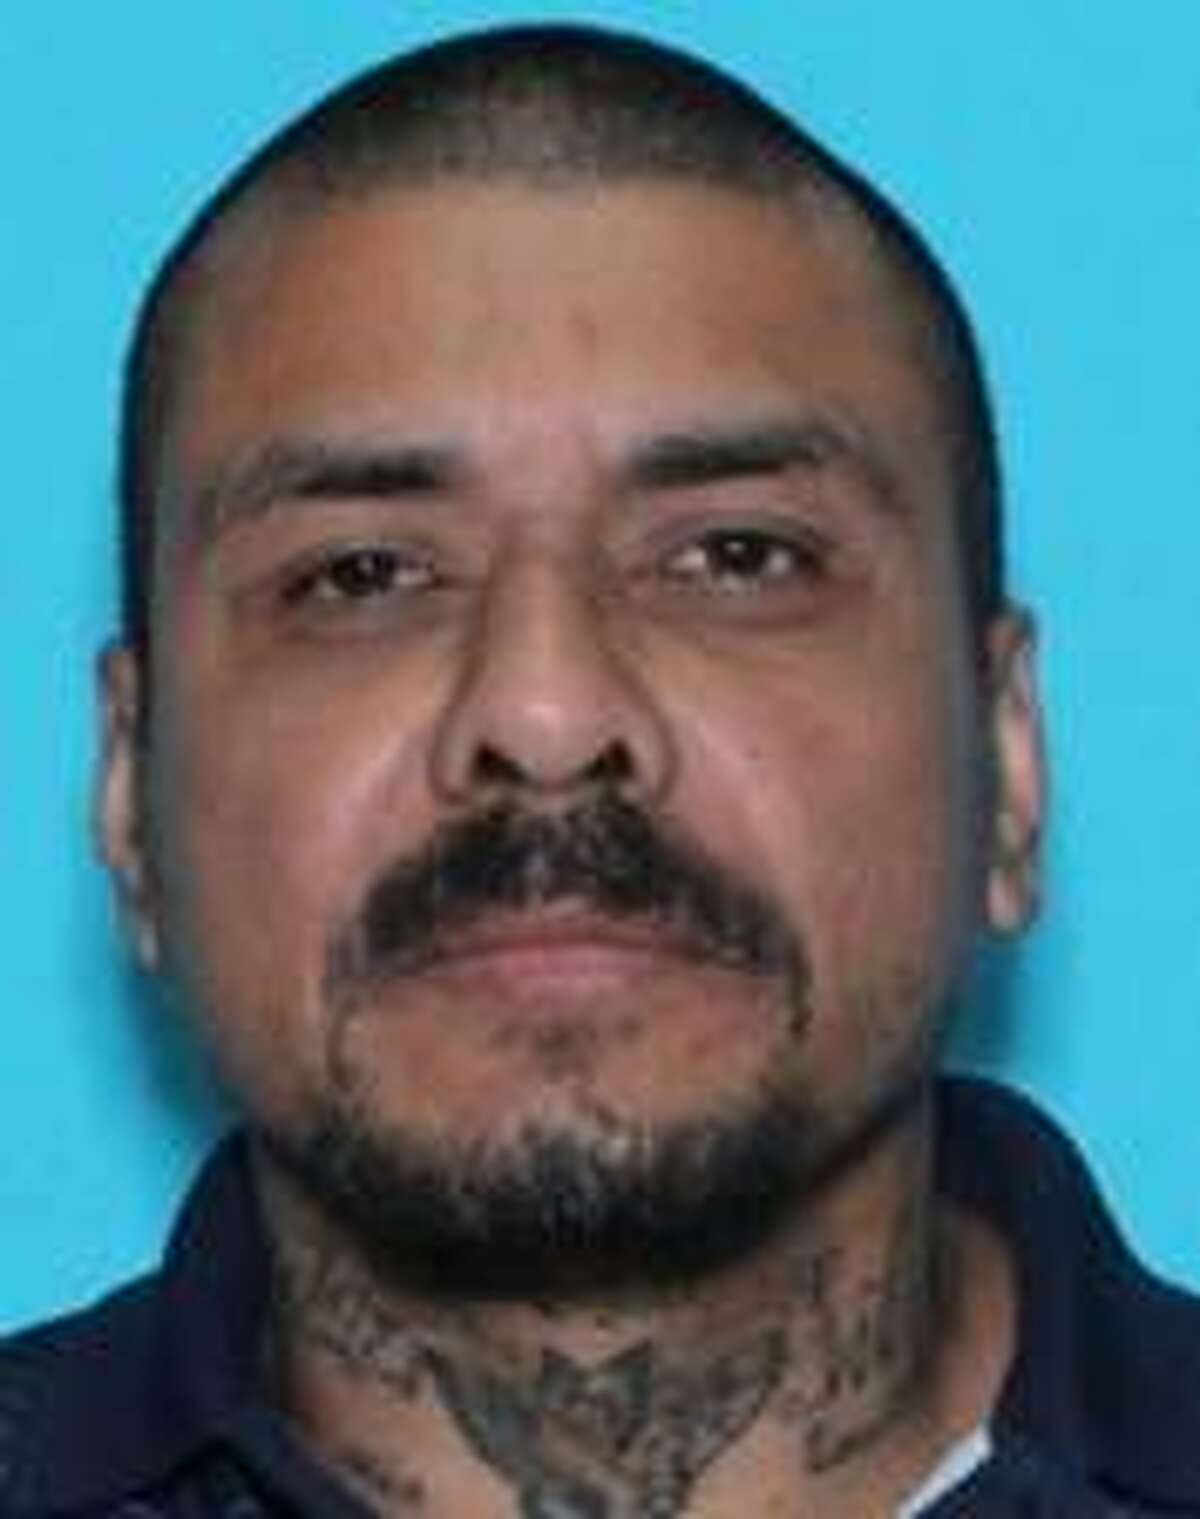 Dps Sex Offender With San Antonio Ties Added To Texas 10 Most Wanted List 5841